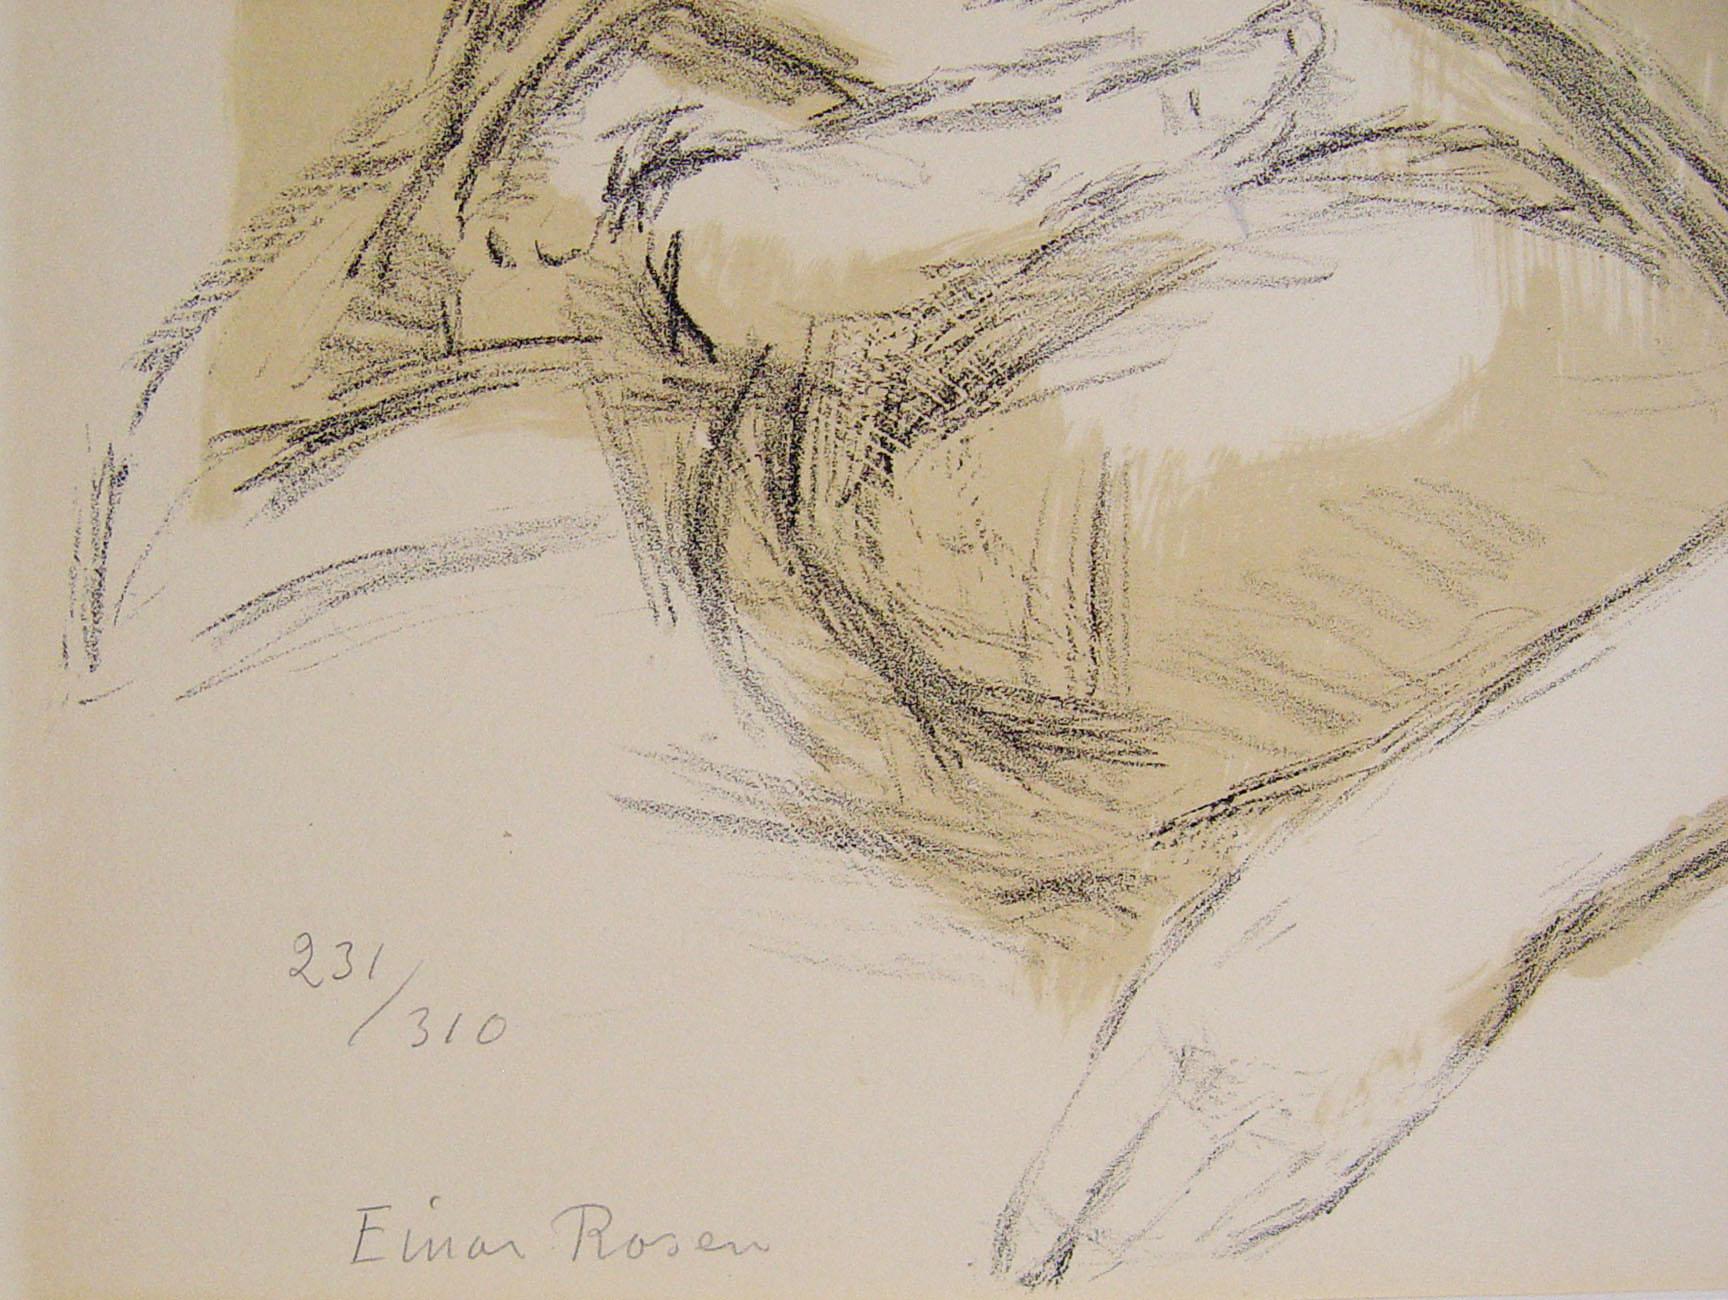 Mid 20th century lithograph on paper portrait of girl hold cat by Einar Rosen (1910-1998) Sweden. Signed and numbered 231/310 in pencil lower left corner. Unframed, age toning.